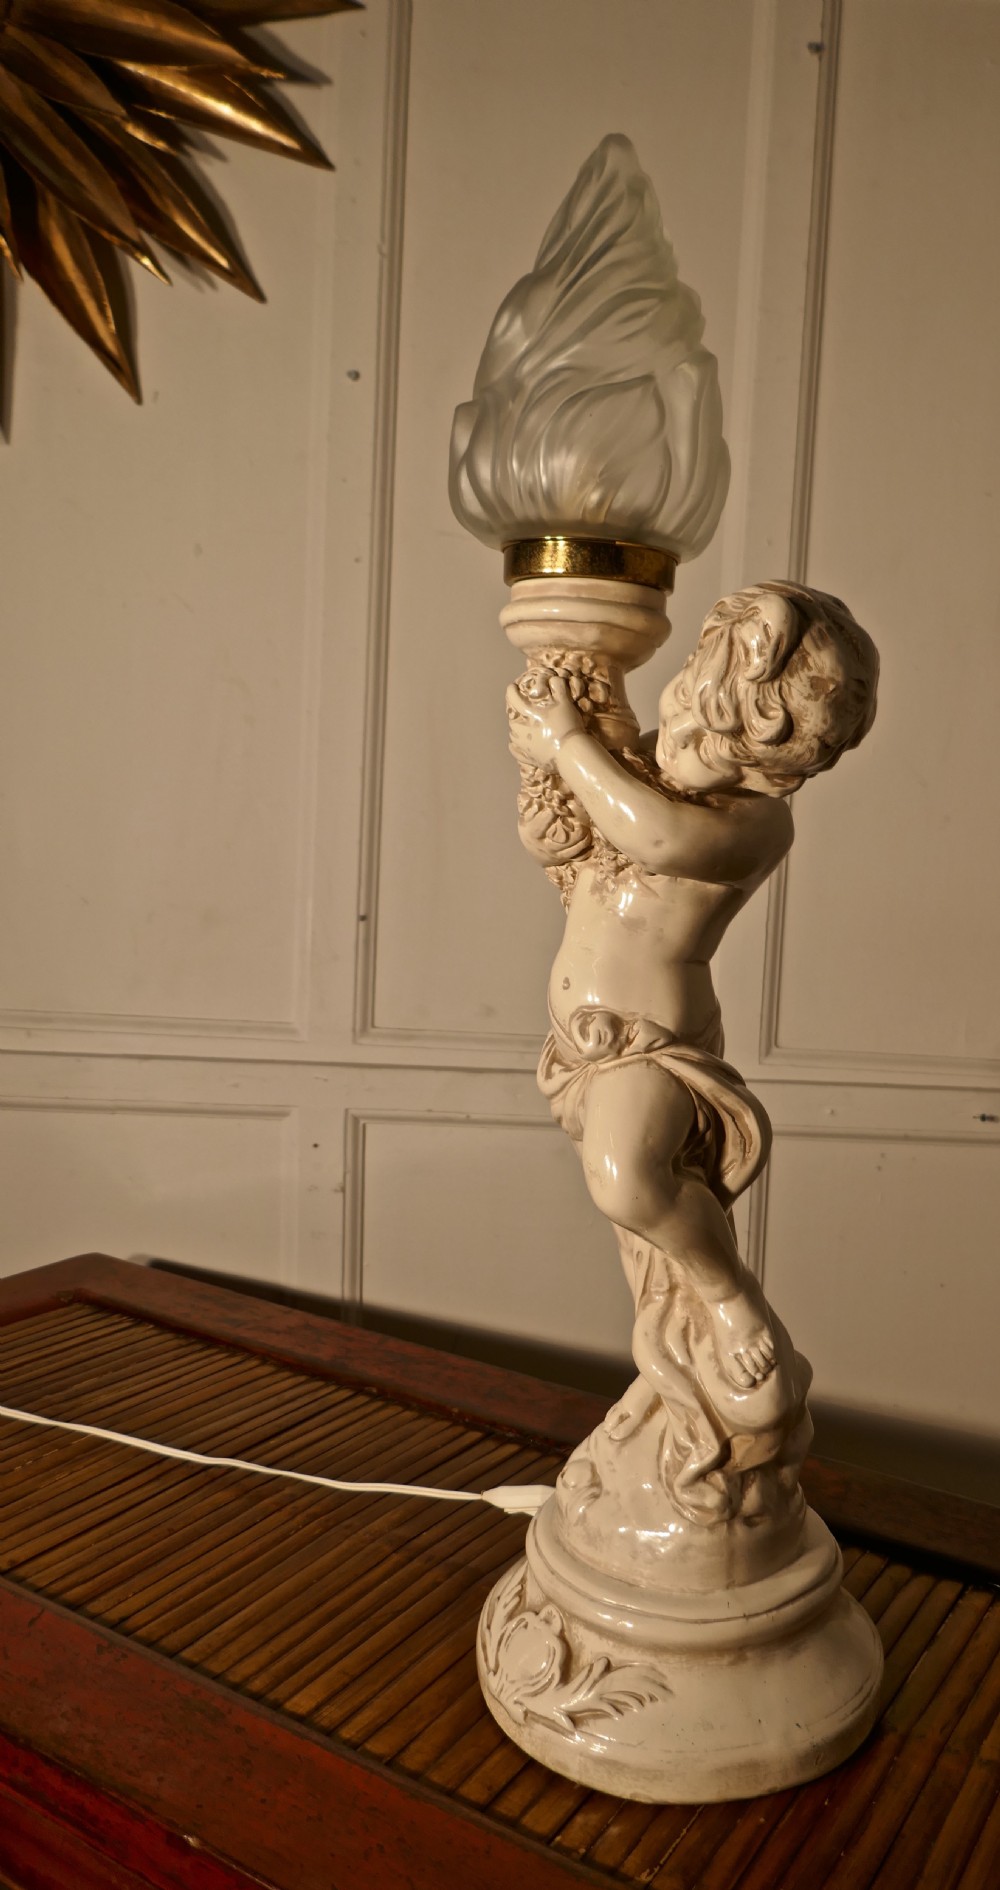 a large ceramic table lamp in the form of a cherub or putti